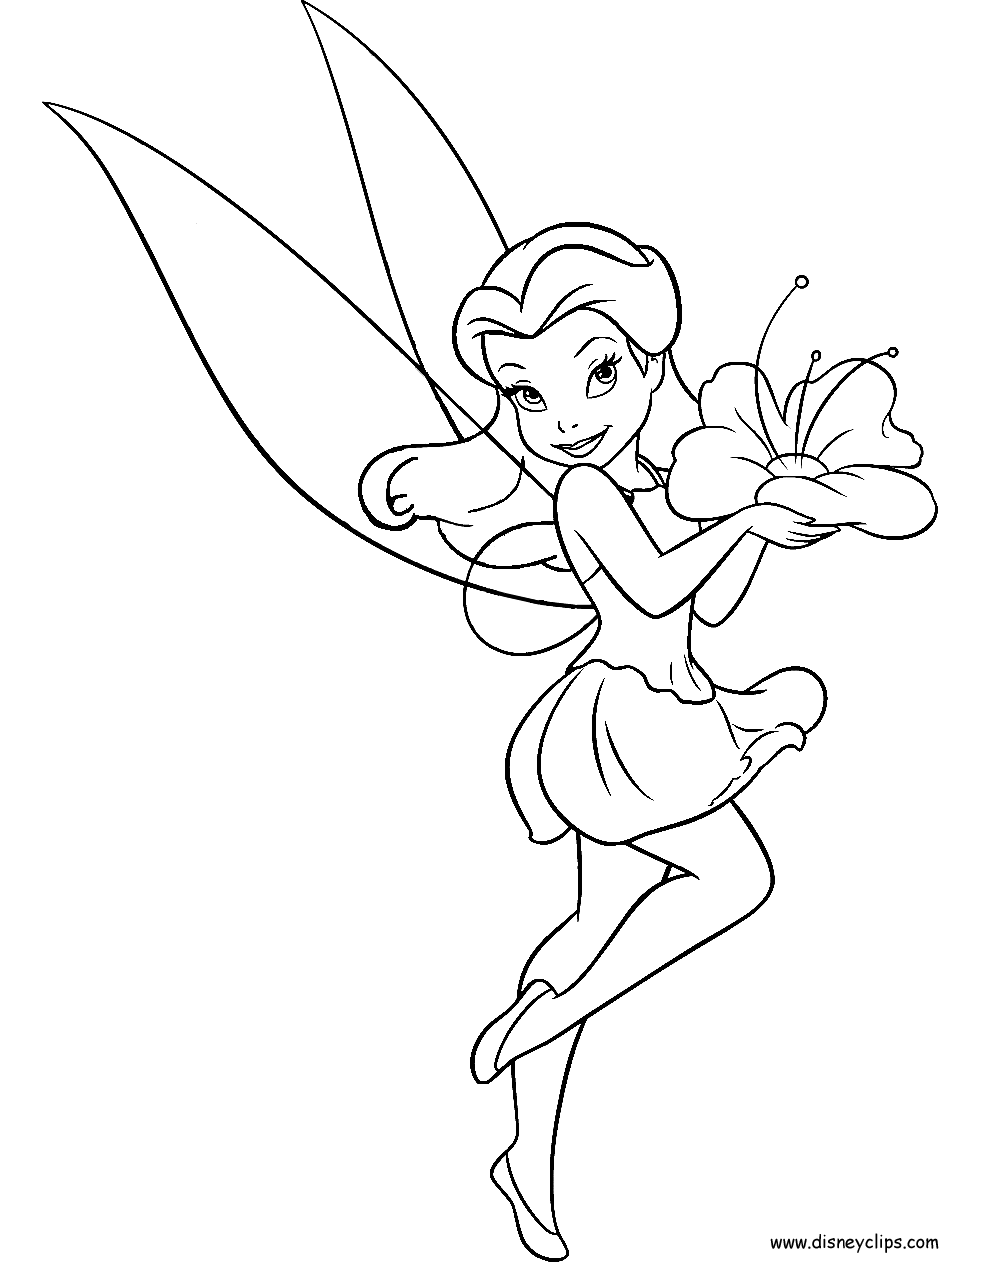 rosetta fairy coloring pages tinkerbell rosetta 01 coloring page coloring page central fairy pages coloring rosetta 